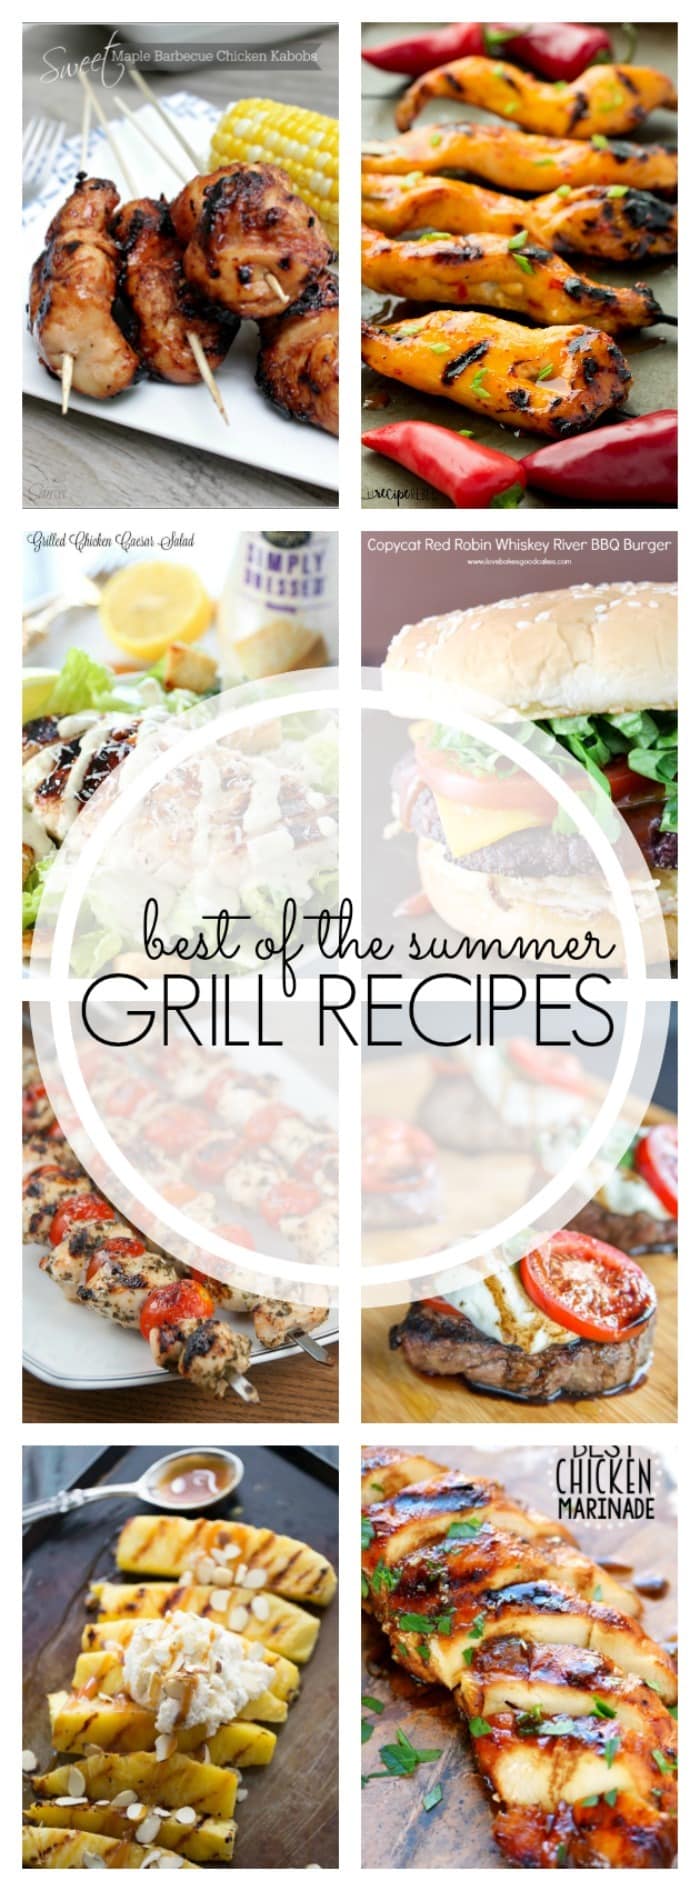 25+ Best Grilling Recipes for summer!! Warm weather is for grilling, right? Fire up the grill and let's get cooking! You will love these 25 best grilling recipes that are perfect for summer!